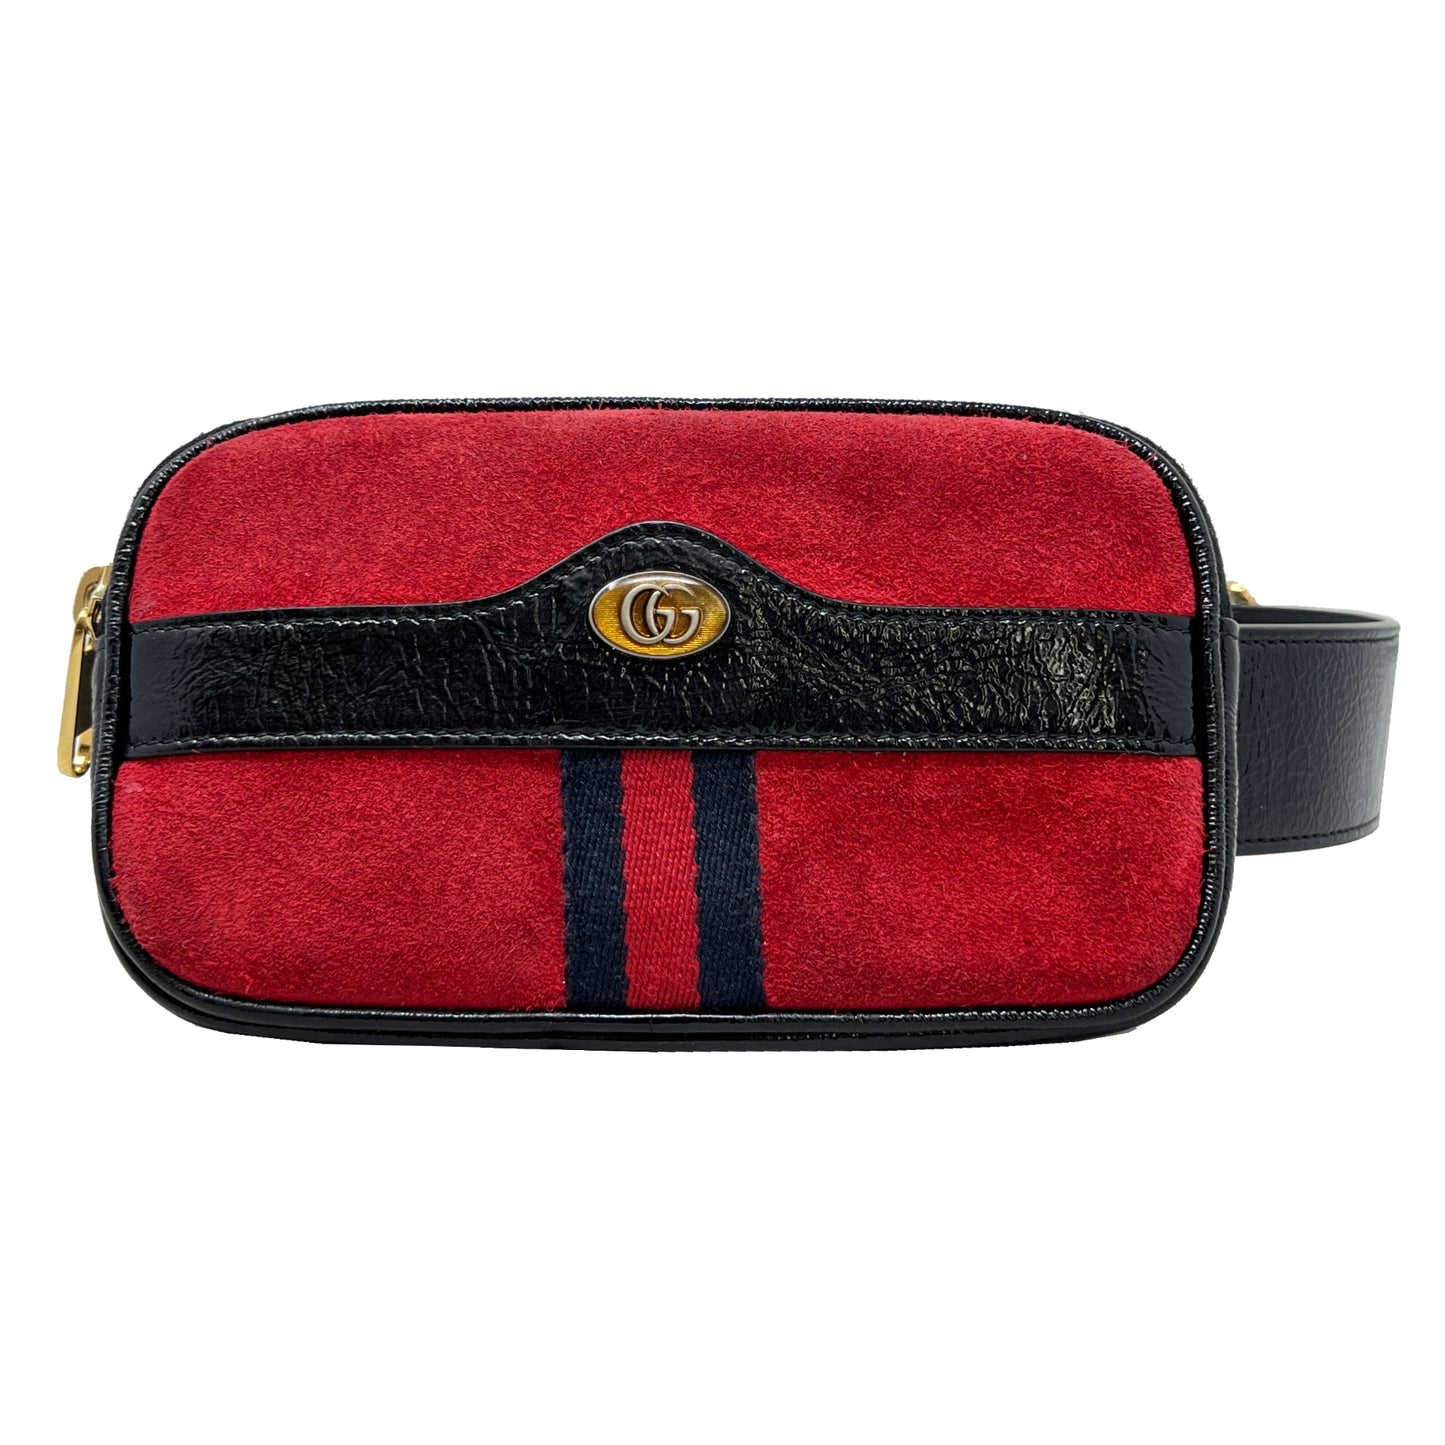 Gucci Ophidia Red Suede Patent Leather Trim Web Clutch Round Belt Bag